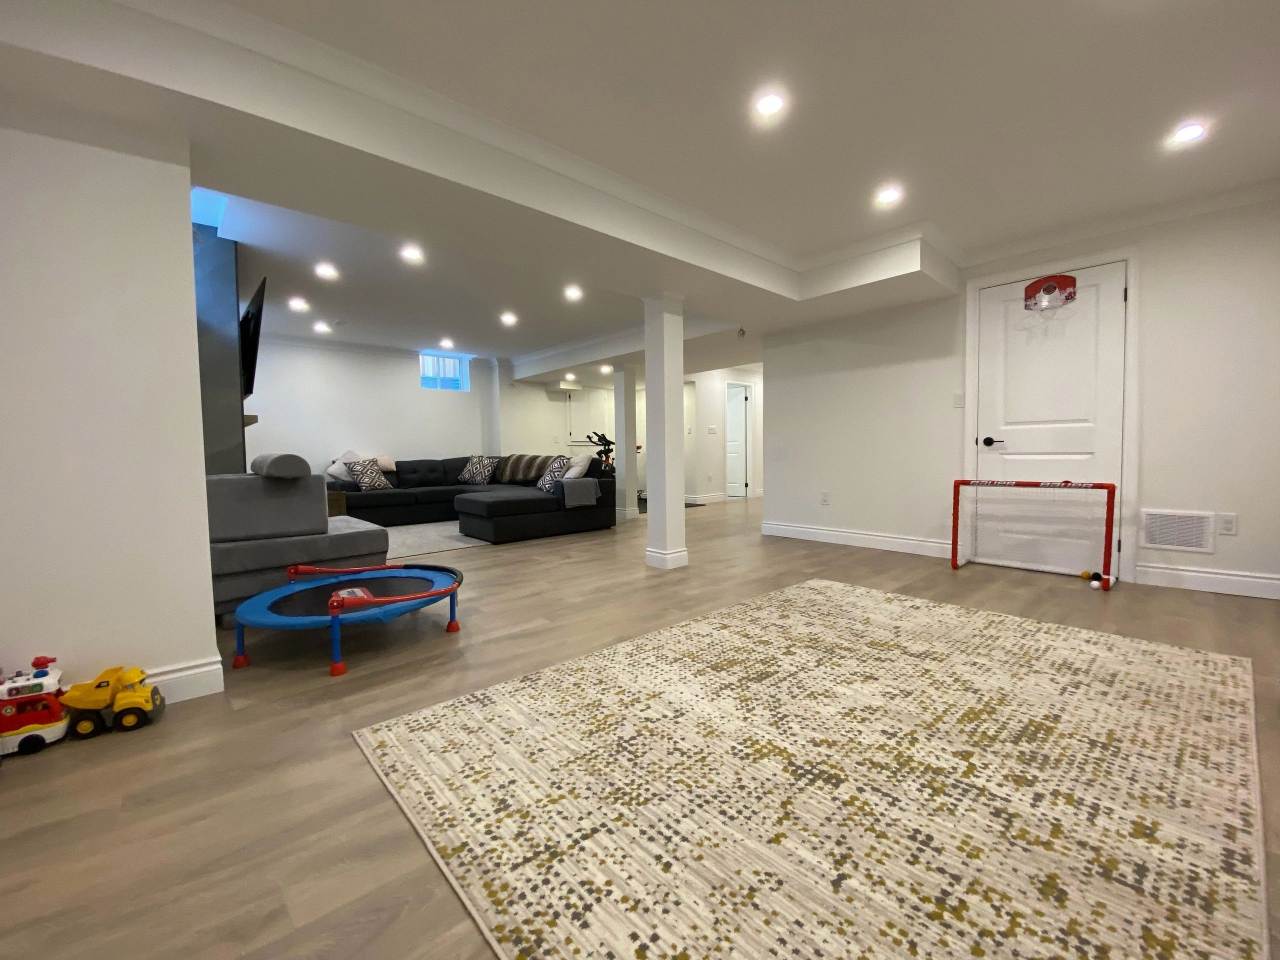 A room with a hockey net and a couch in it